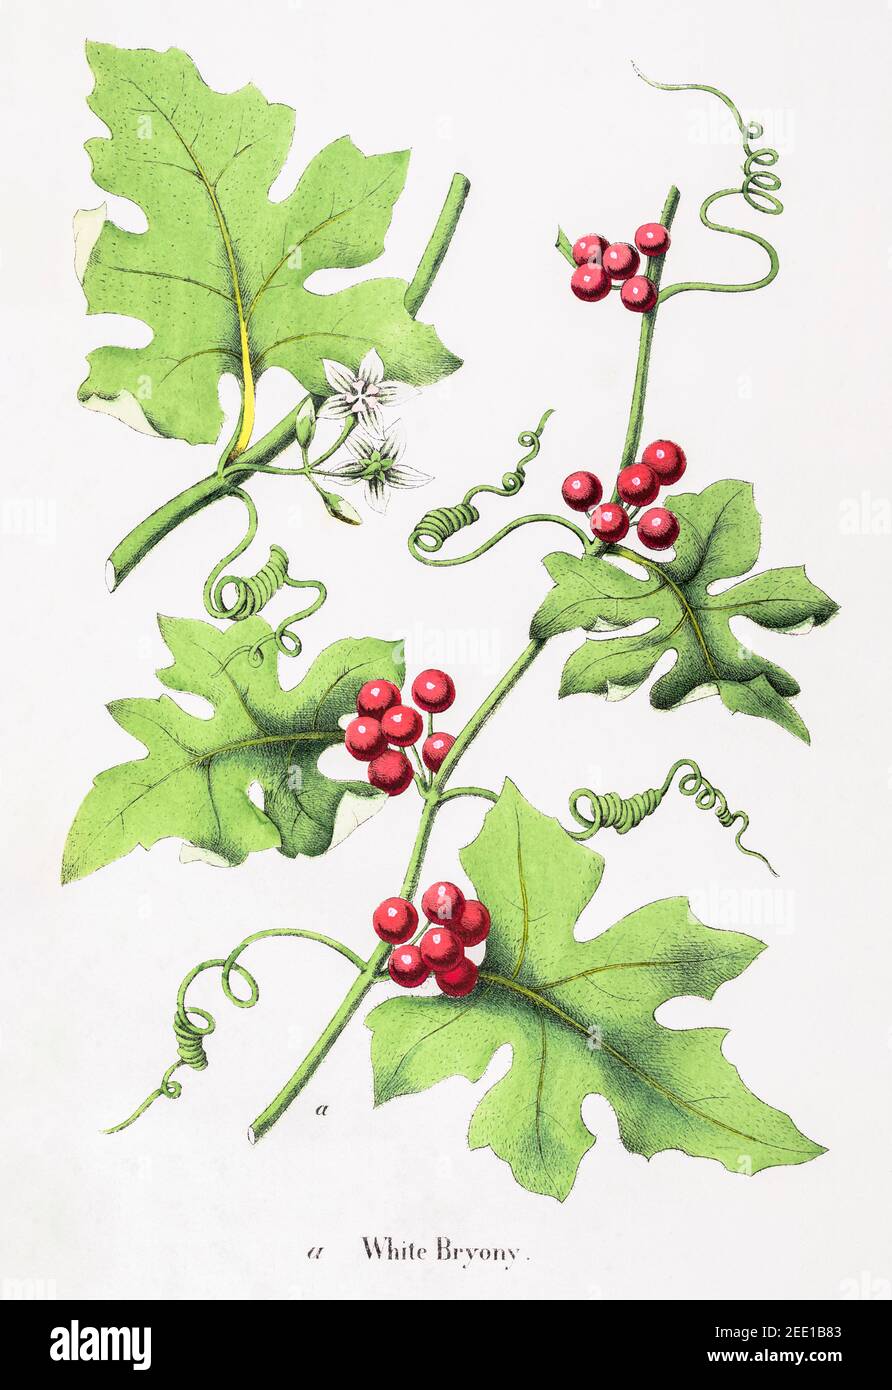 Digitally restored 19th century Victorian botanical illustration of White Bryony / Bryonia cretica. See notes for source and process info. Stock Photo